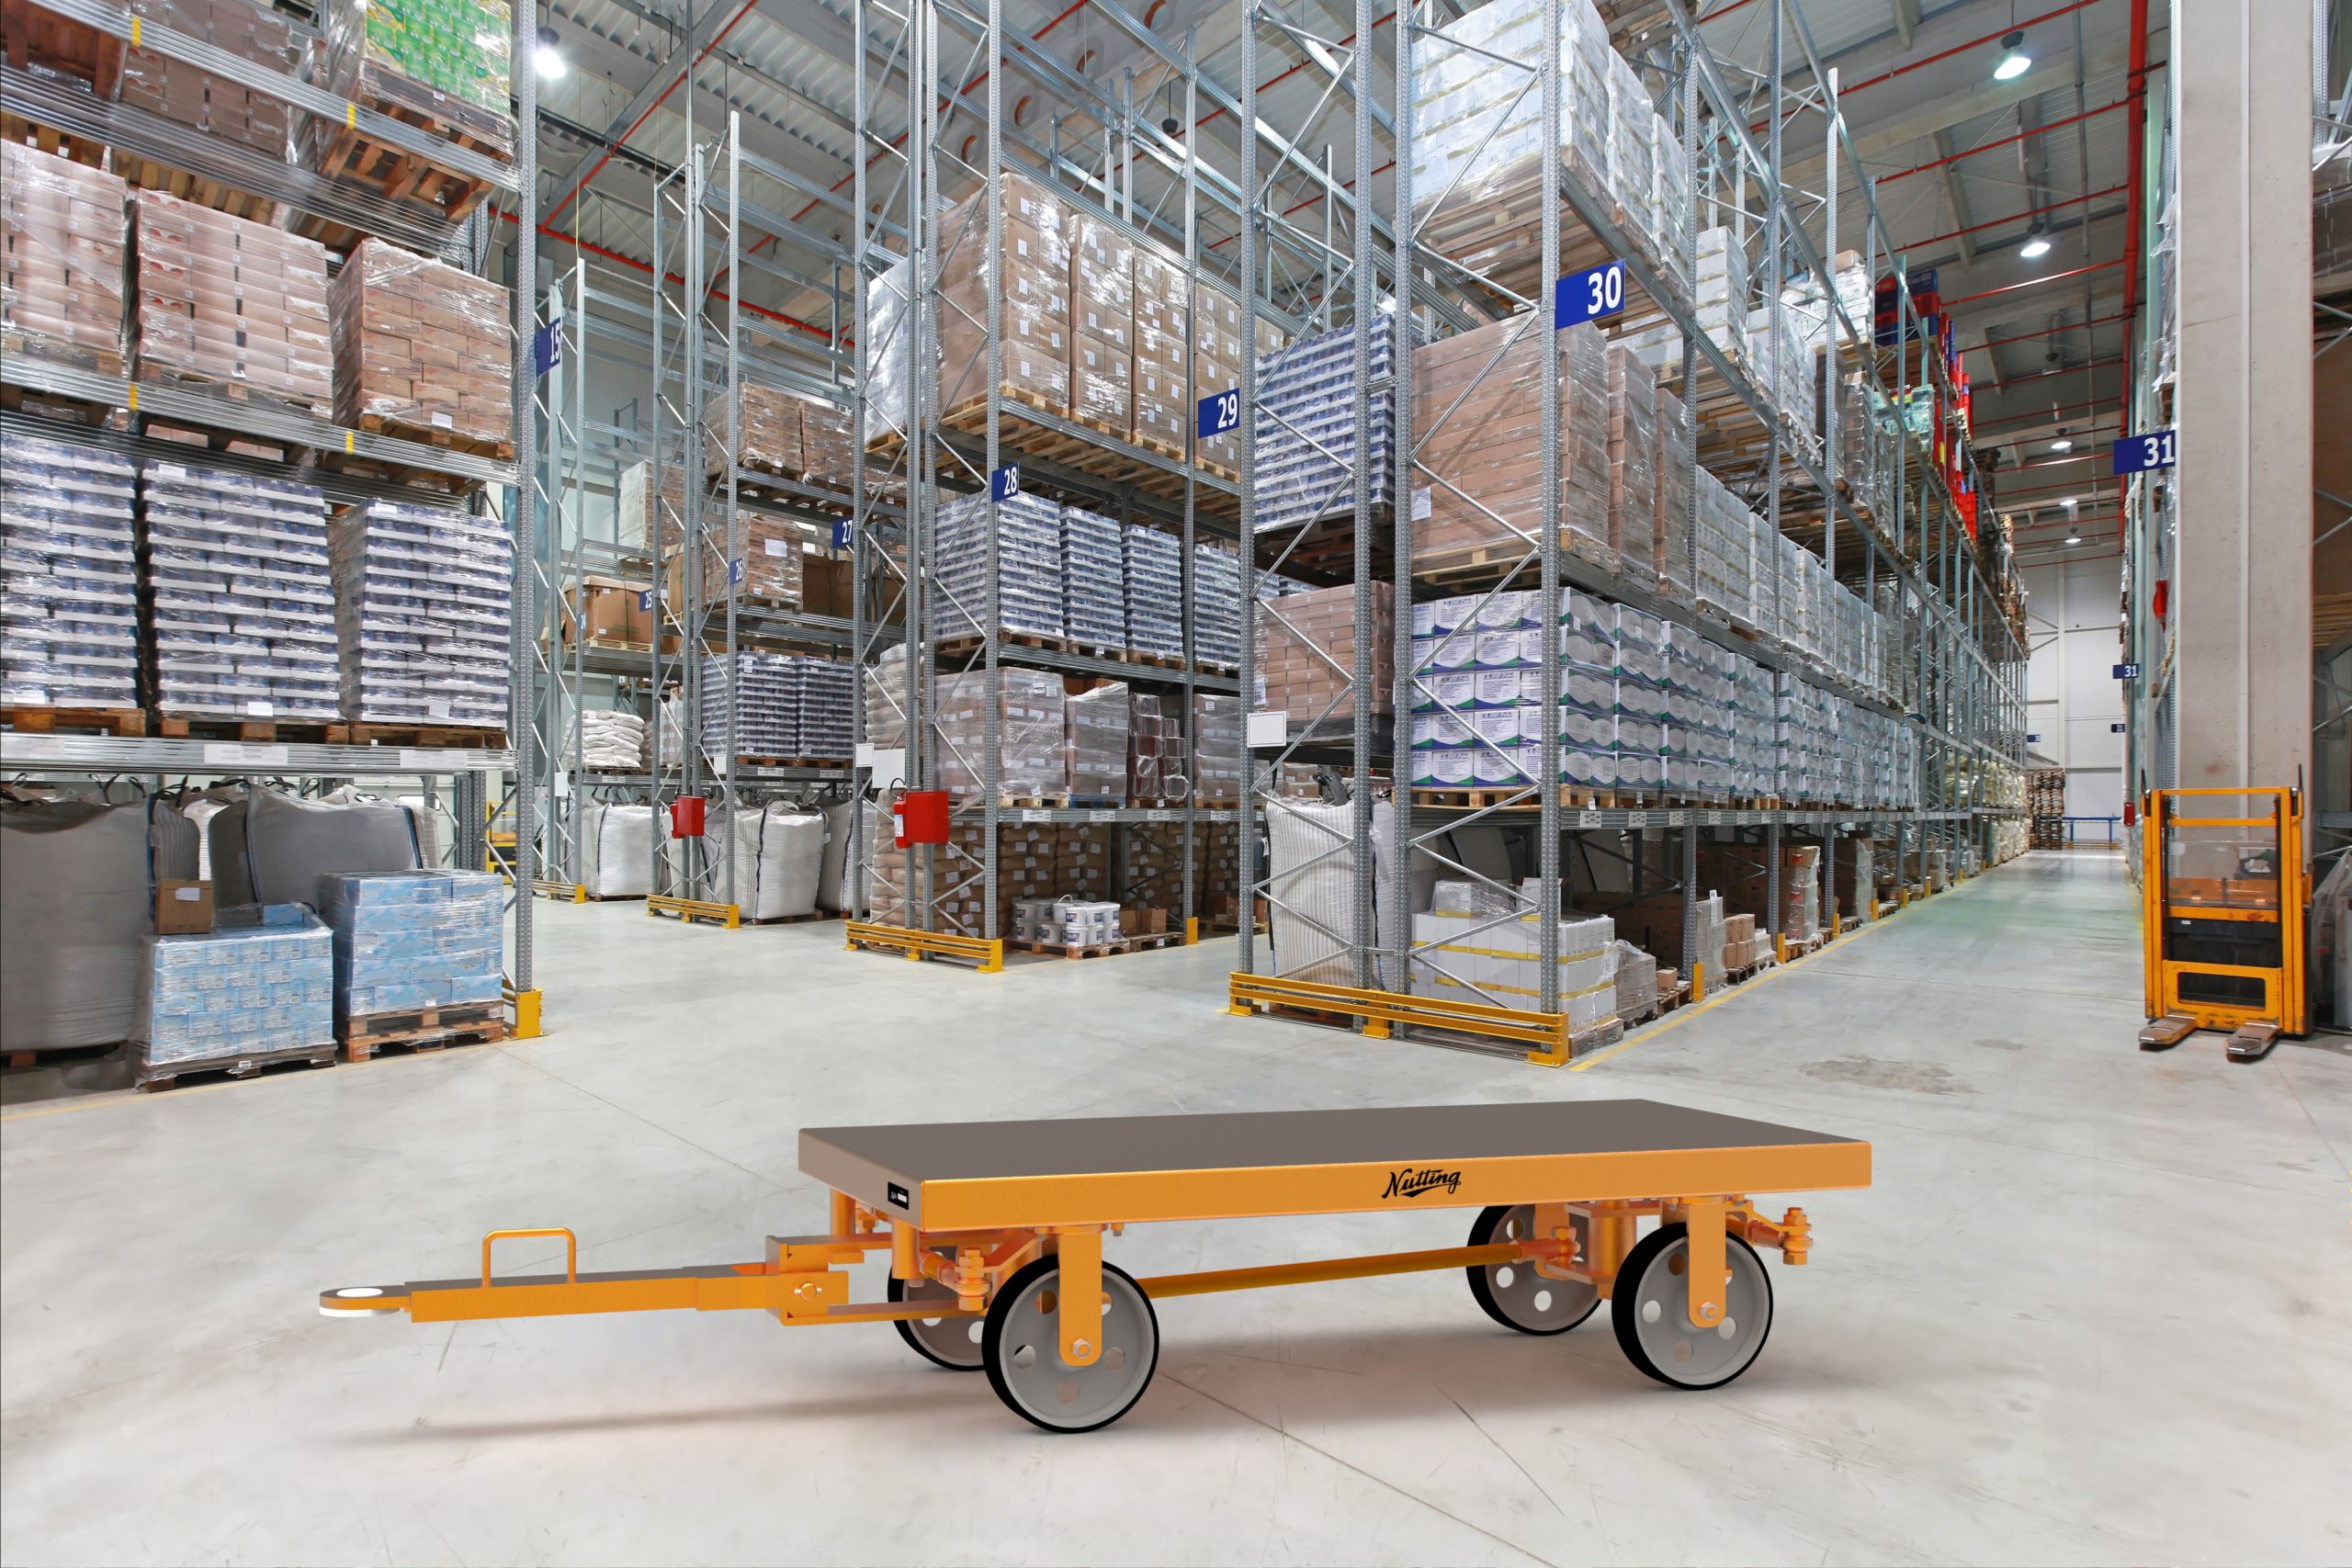 The Top 5 Benefits of Using Warehouse Carts in Your Facility